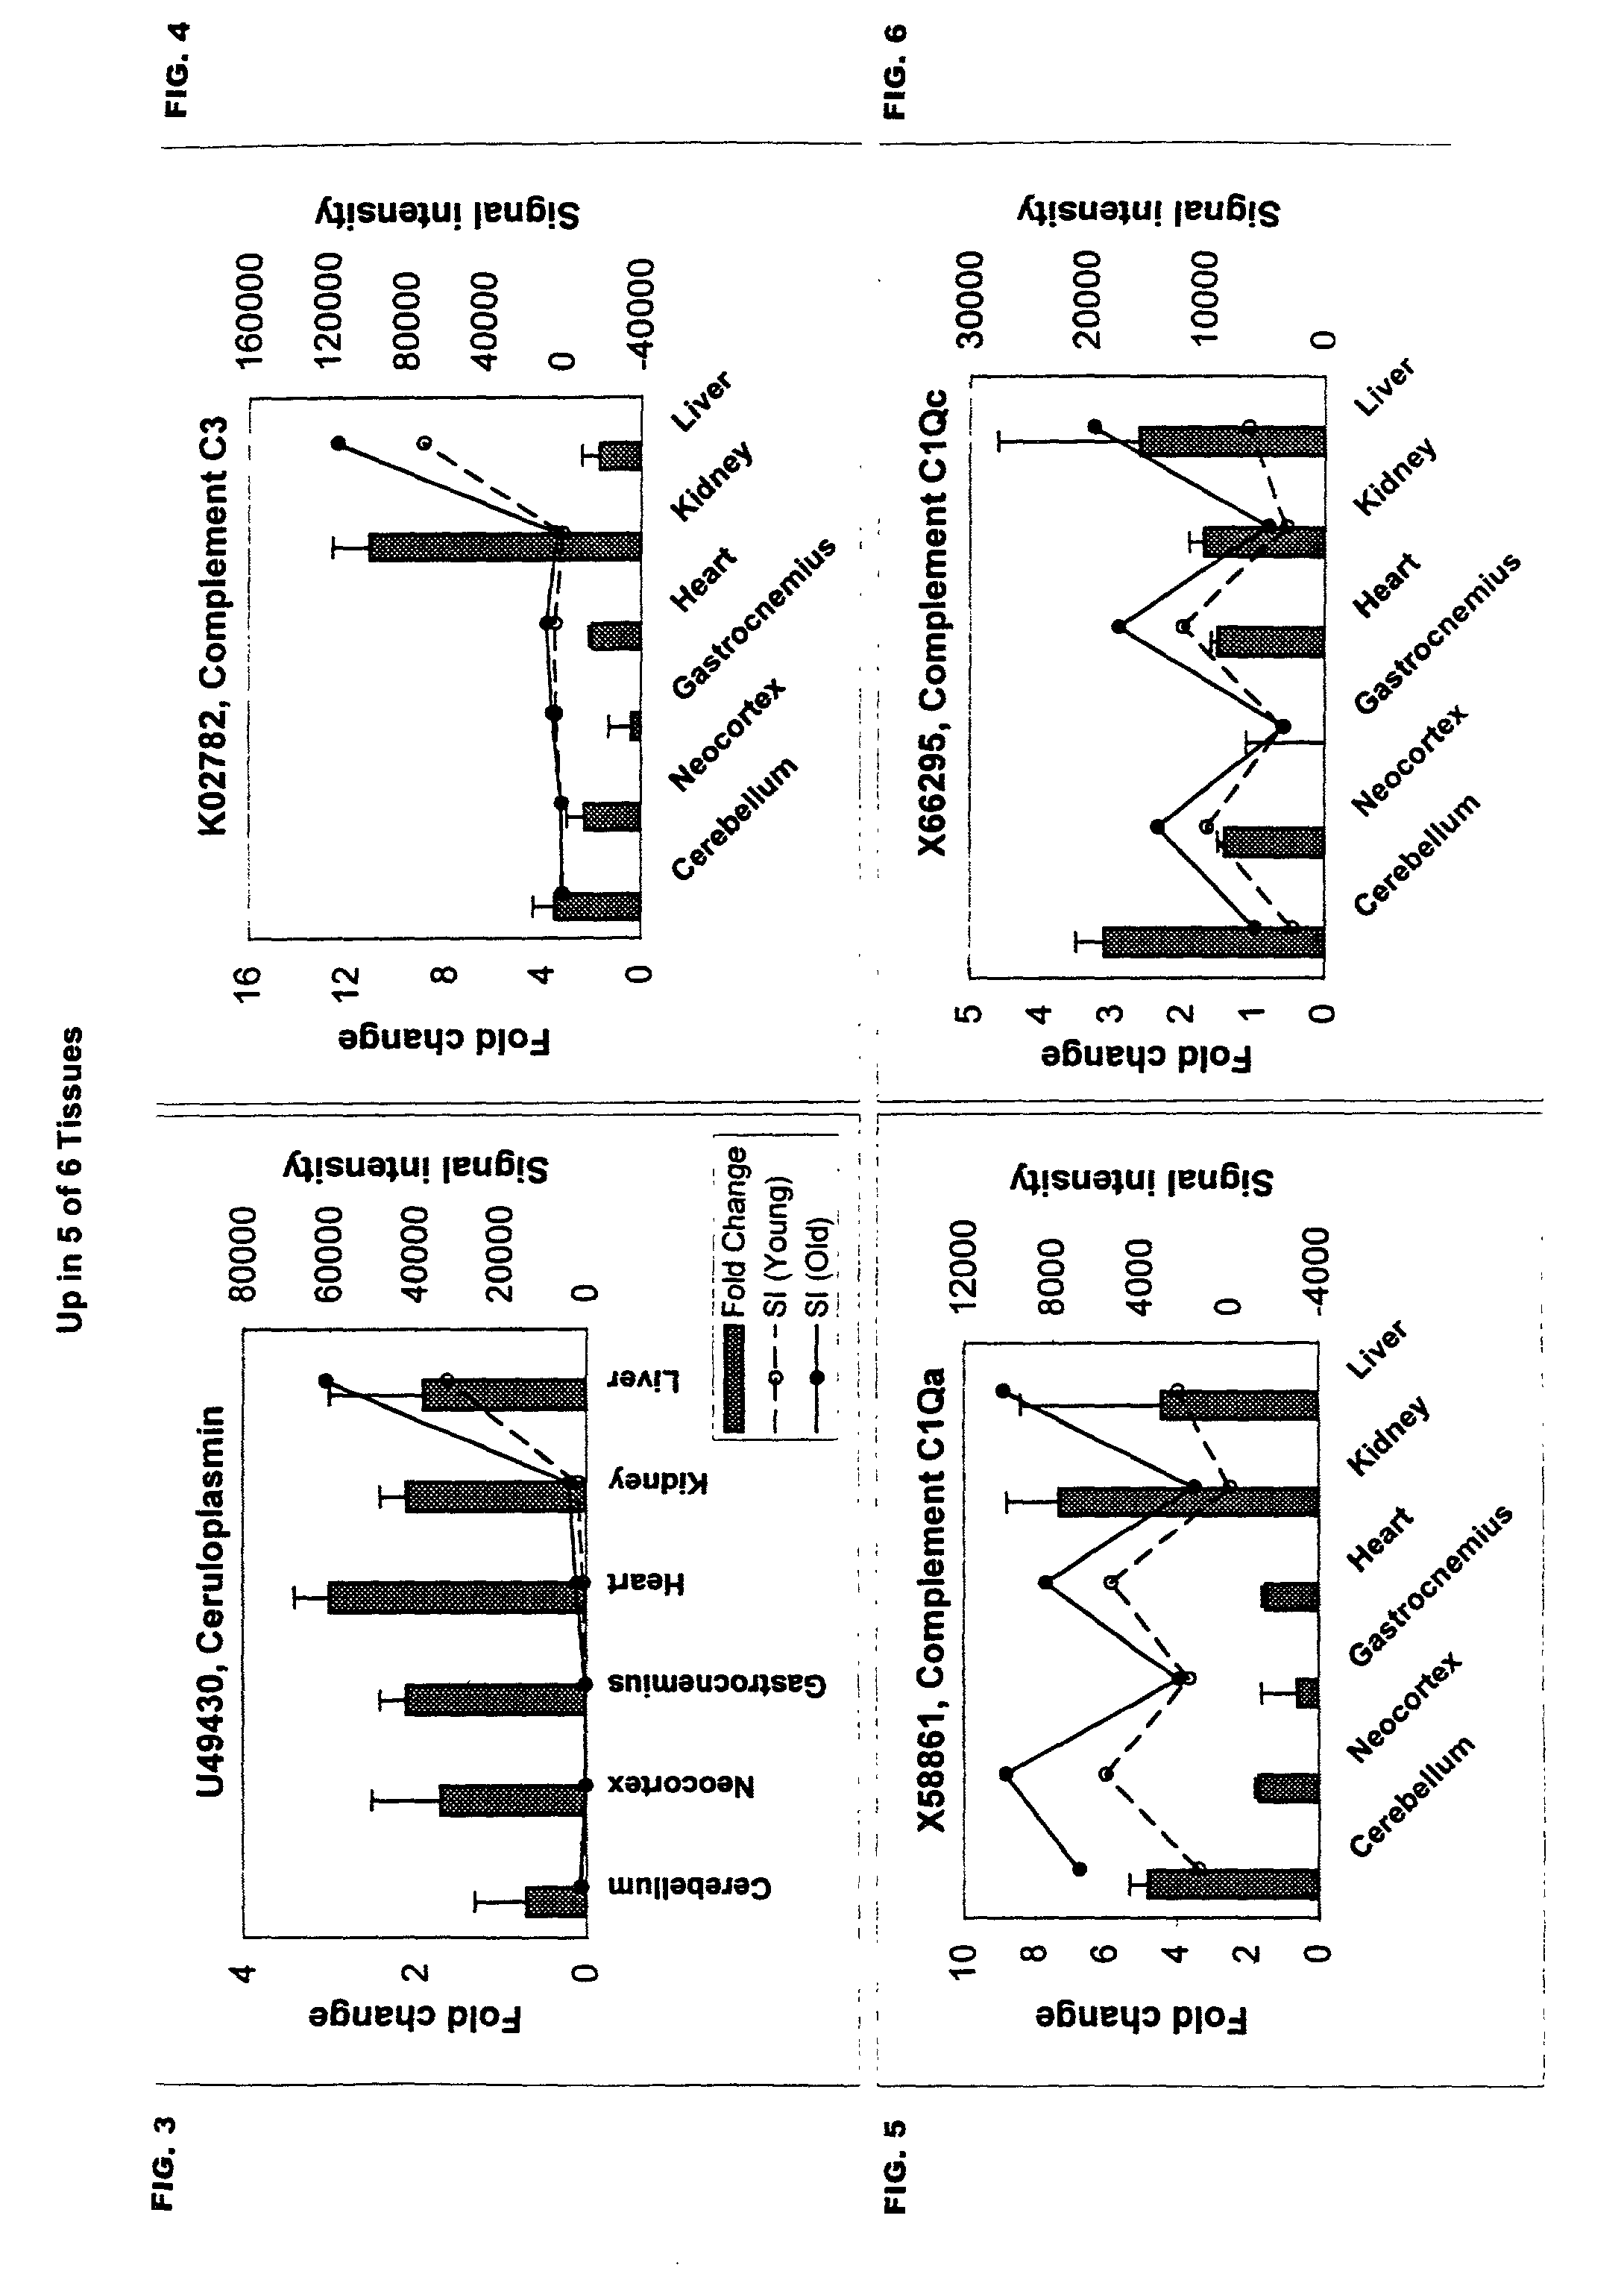 Methods of screening for compounds that inhibit expression of biomarker sequences differentially expressed with age in mice